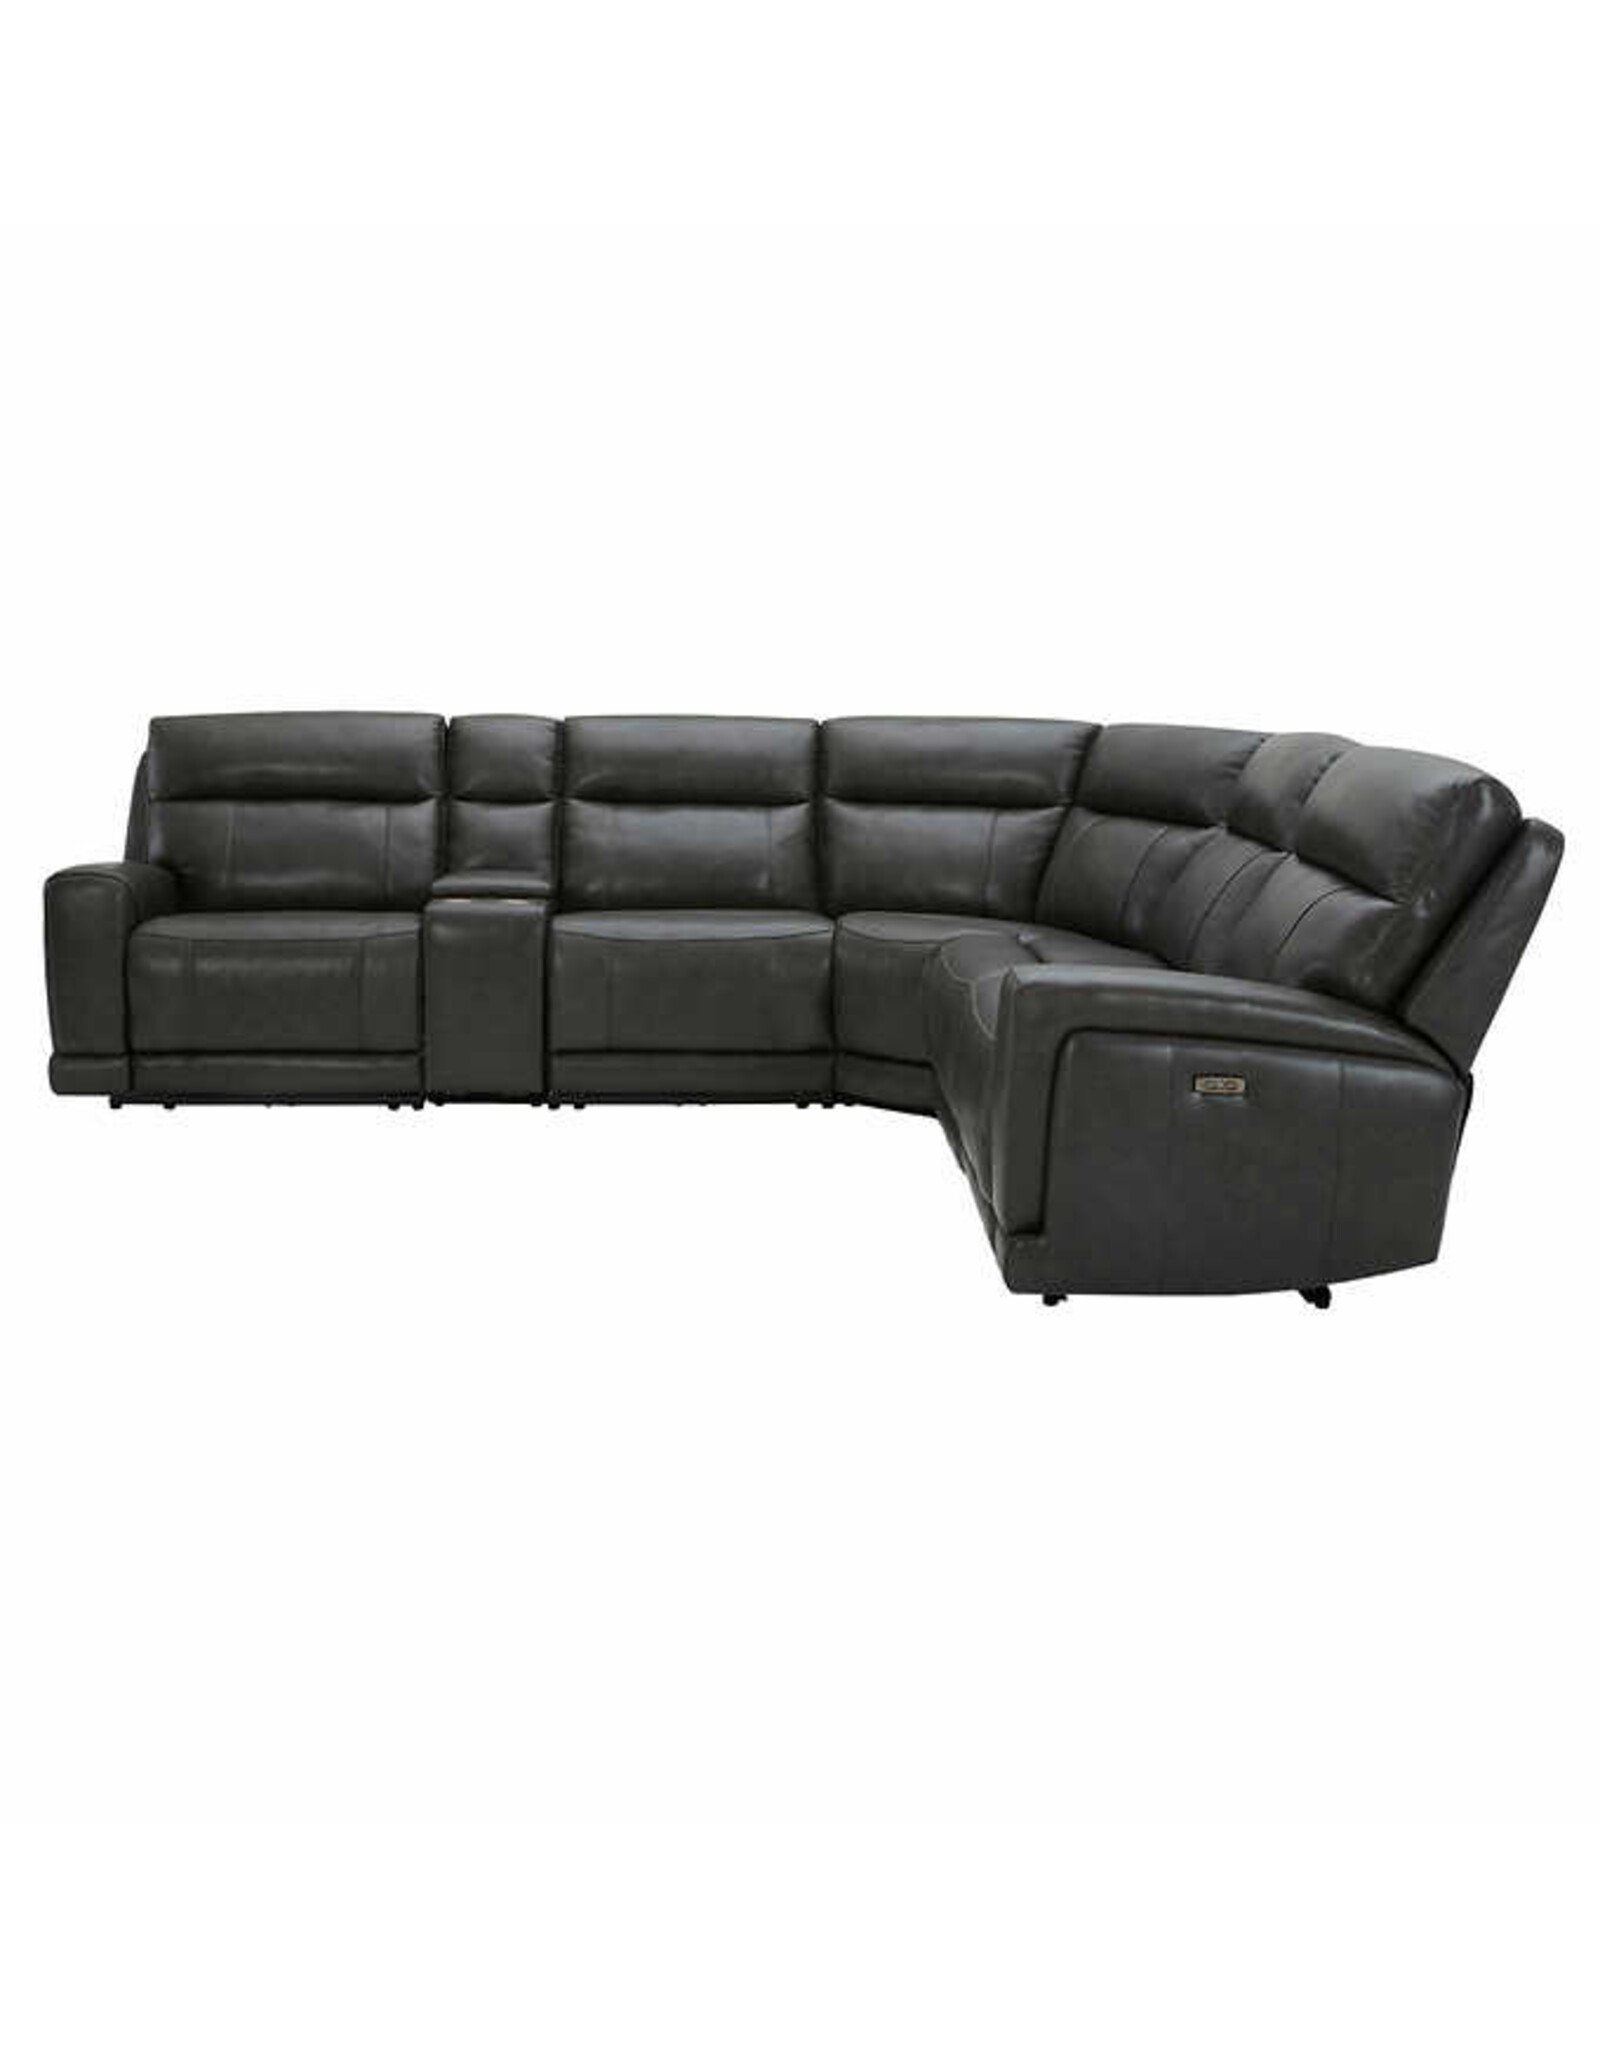 GILMAN CREEK FURNITURE 1653287 Lauretta 6-piece Leather Power Reclining Sectional with Power Headrests